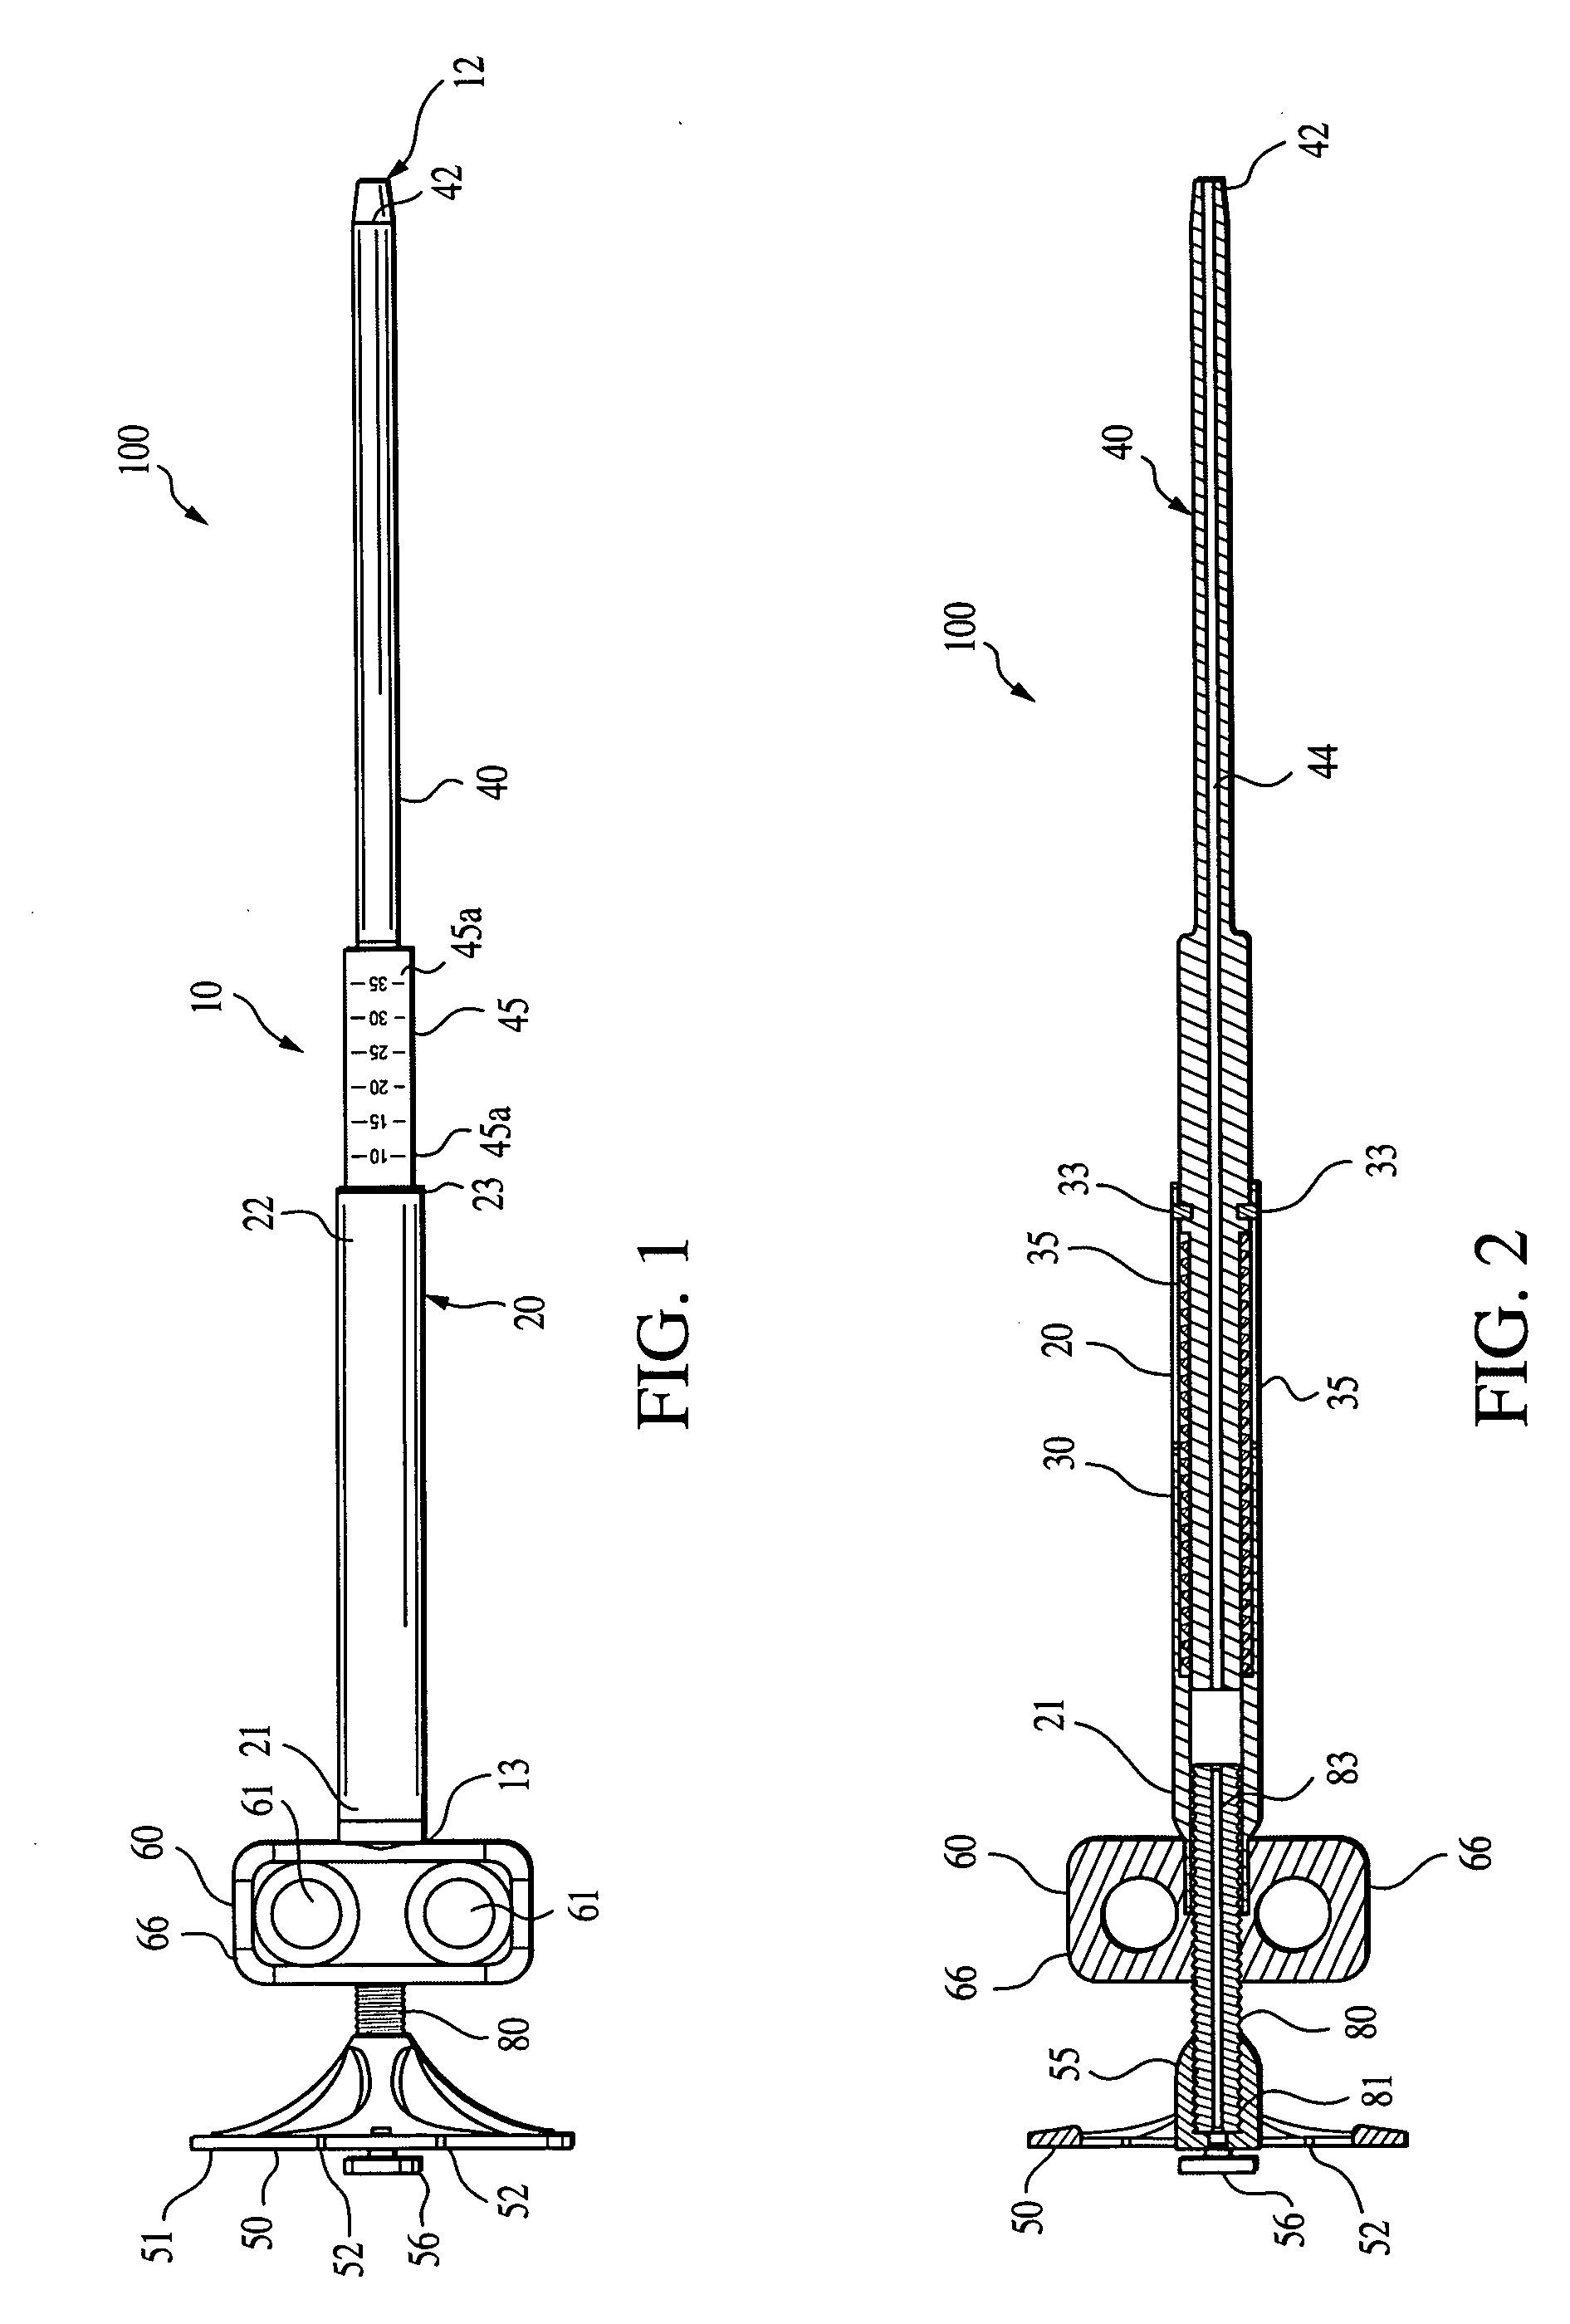 Suture tensioning device